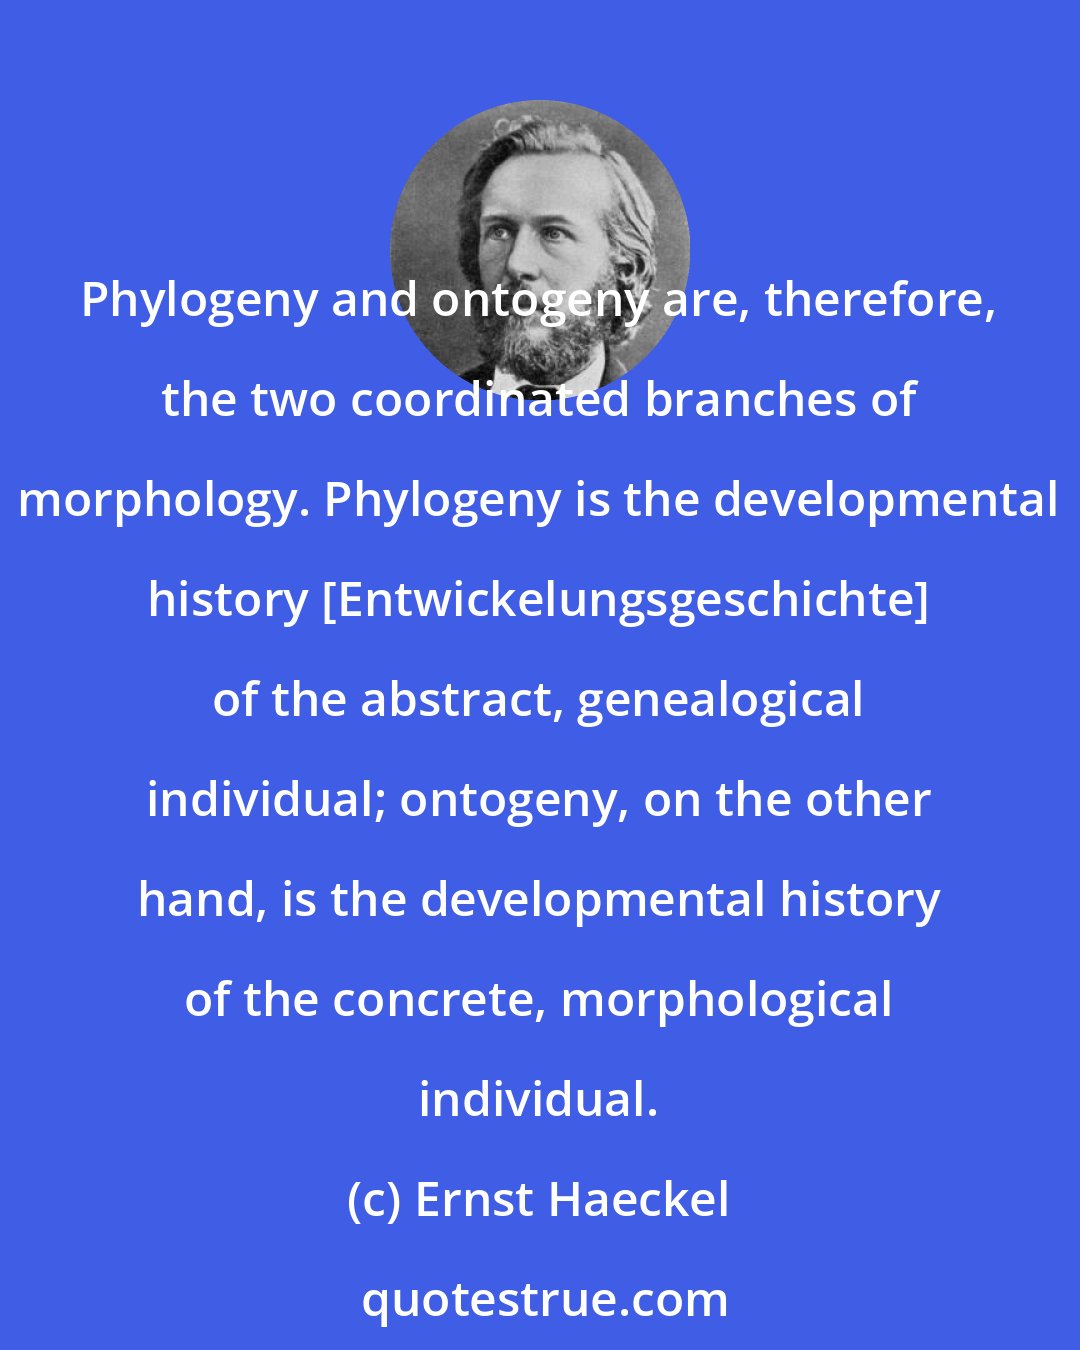 Ernst Haeckel: Phylogeny and ontogeny are, therefore, the two coordinated branches of morphology. Phylogeny is the developmental history [Entwickelungsgeschichte] of the abstract, genealogical individual; ontogeny, on the other hand, is the developmental history of the concrete, morphological individual.